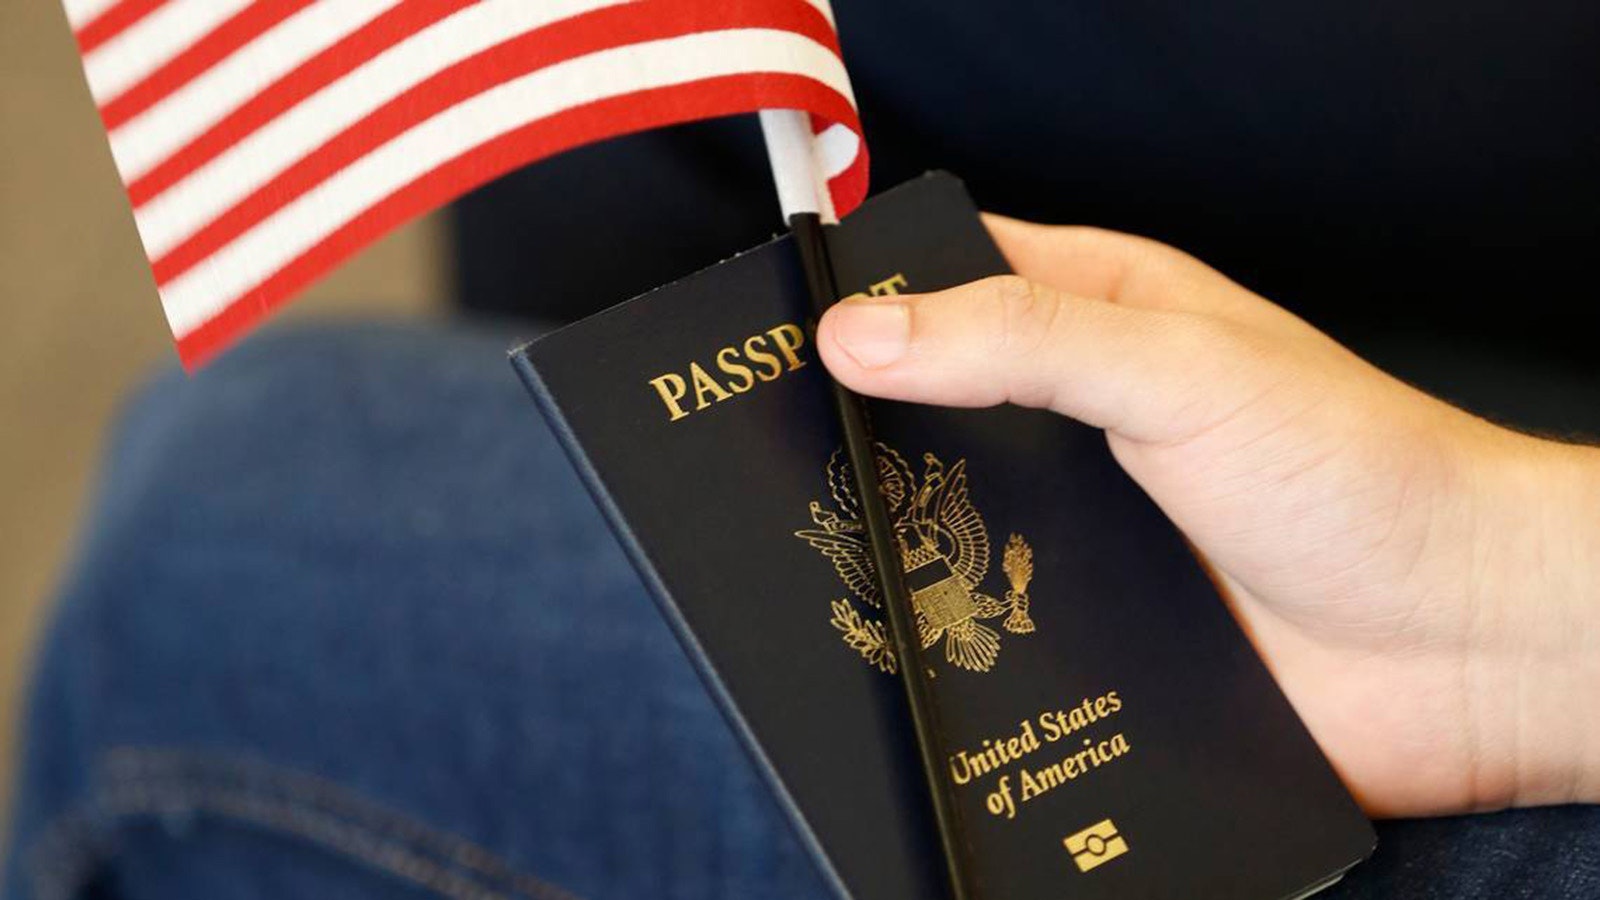 Mobile Passport app is a viable alternative to Global Entry